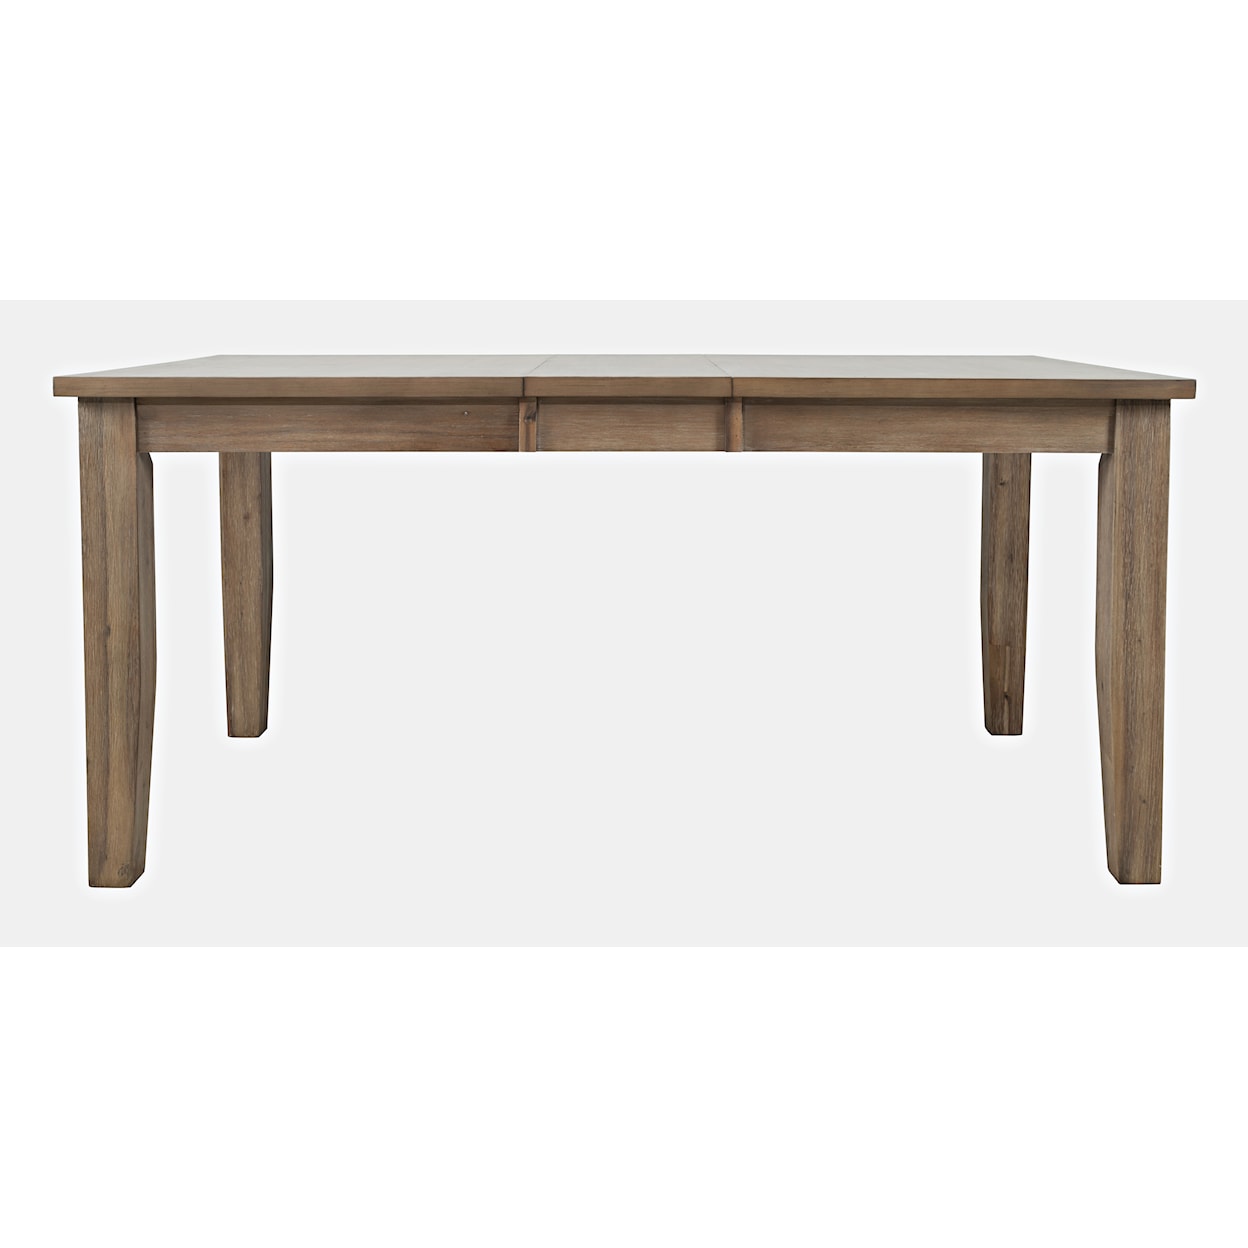 VFM Signature Eastern Tides Ext Dining Table